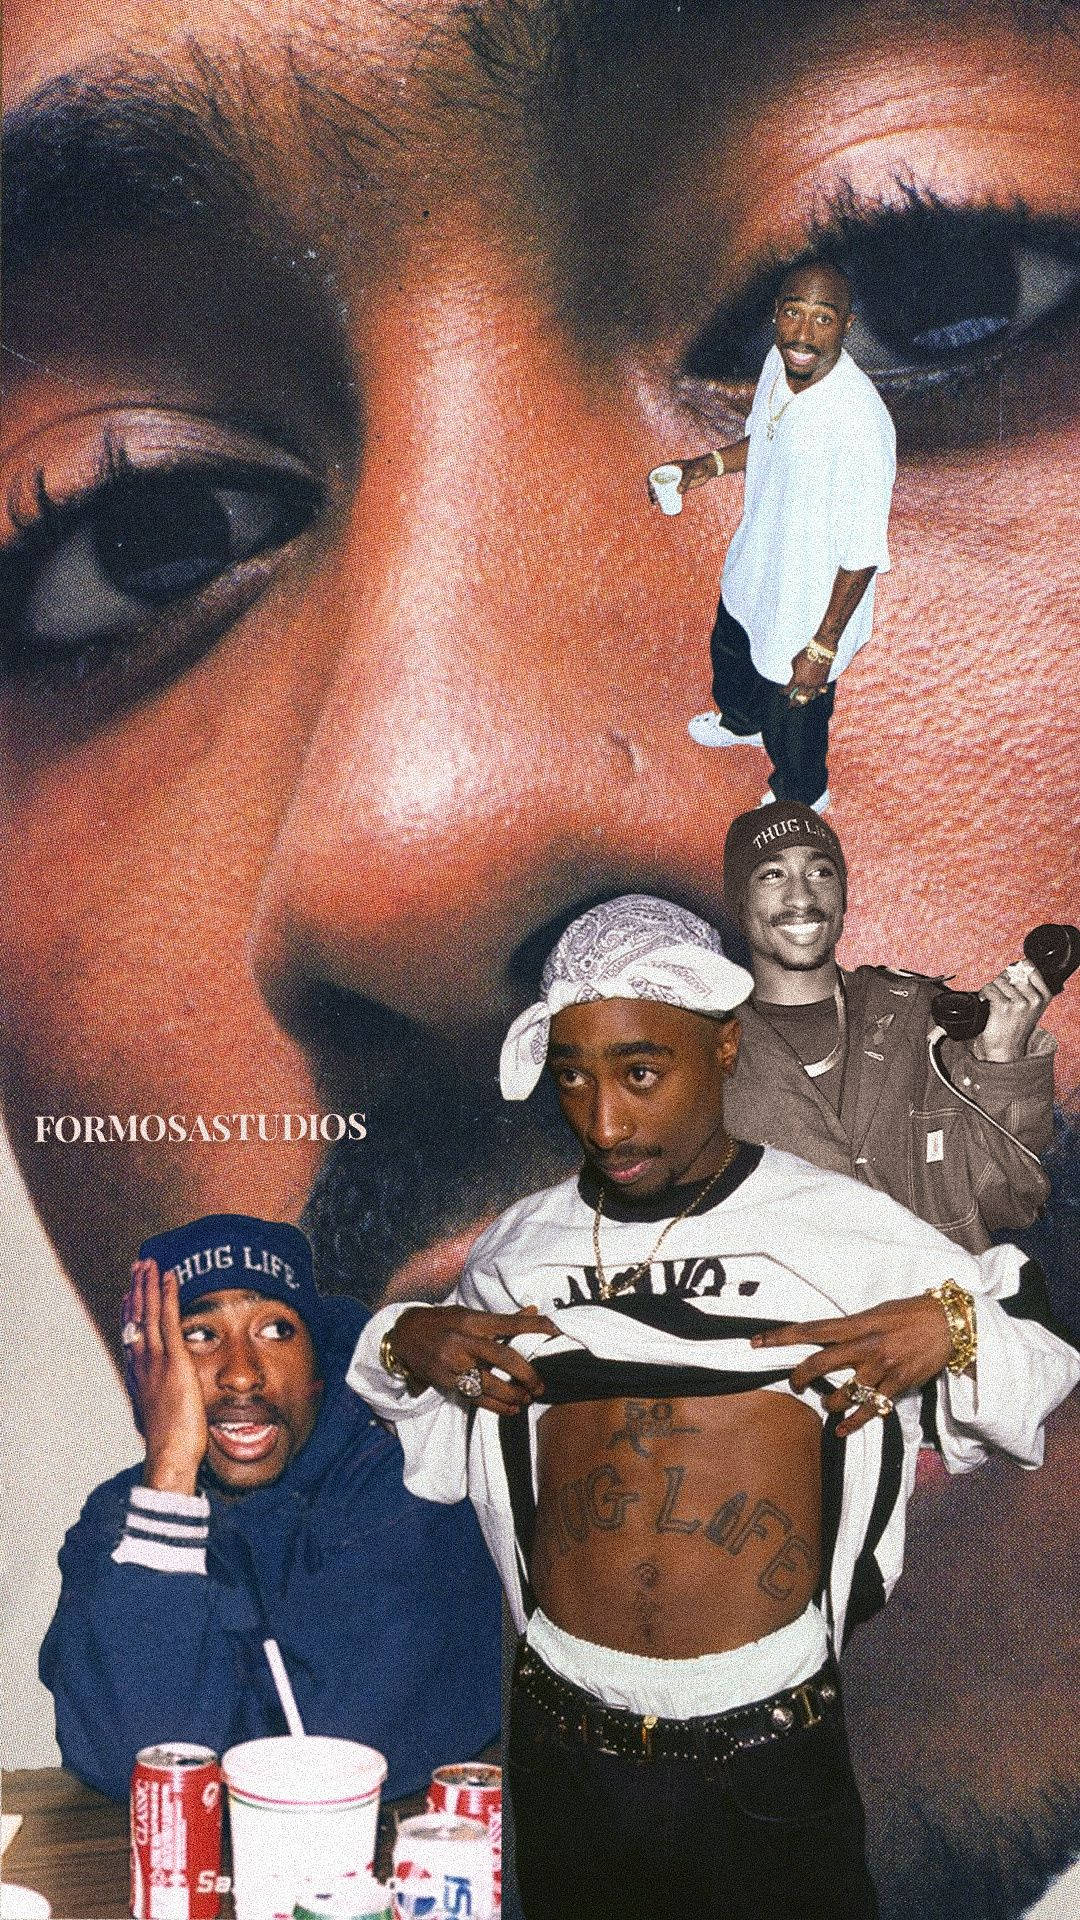 90s Rapper 2pac Background